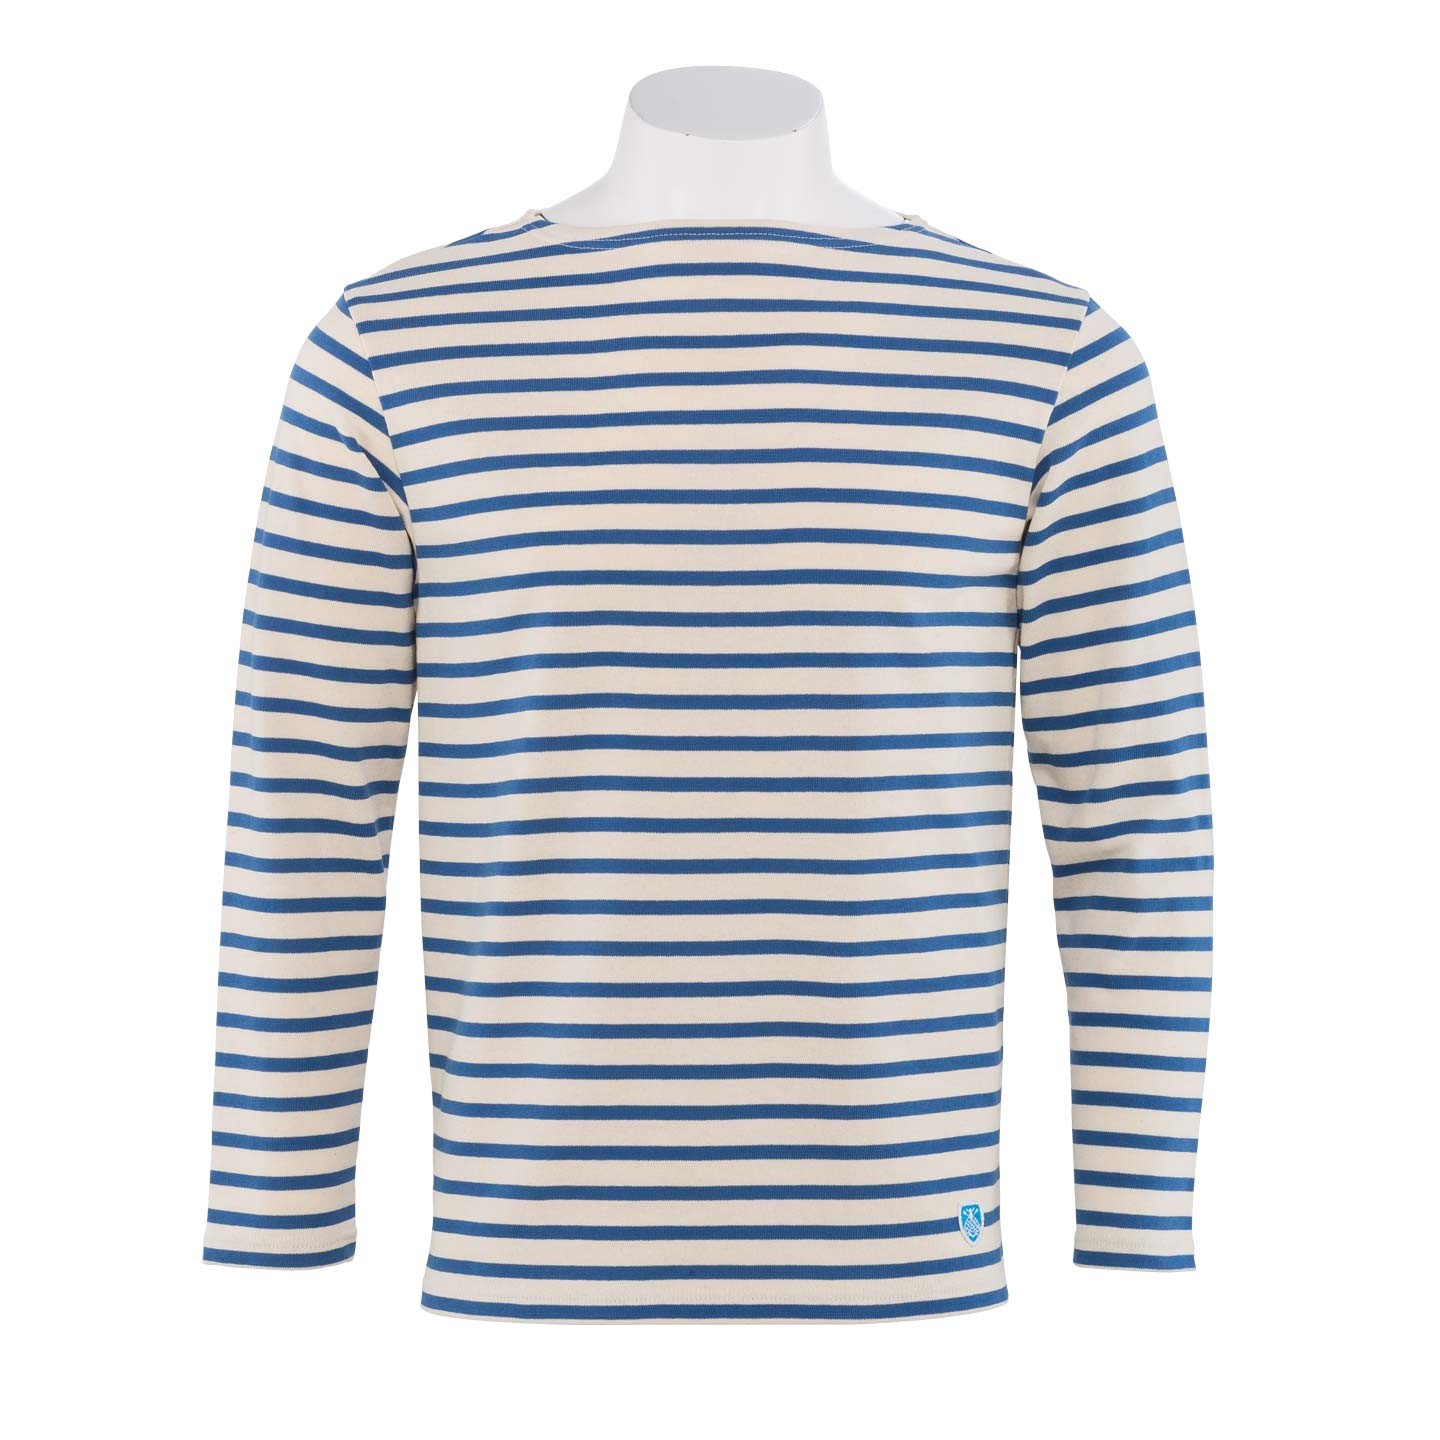 Striped shirt Écru / Océan unisex 100% made in France Orcival